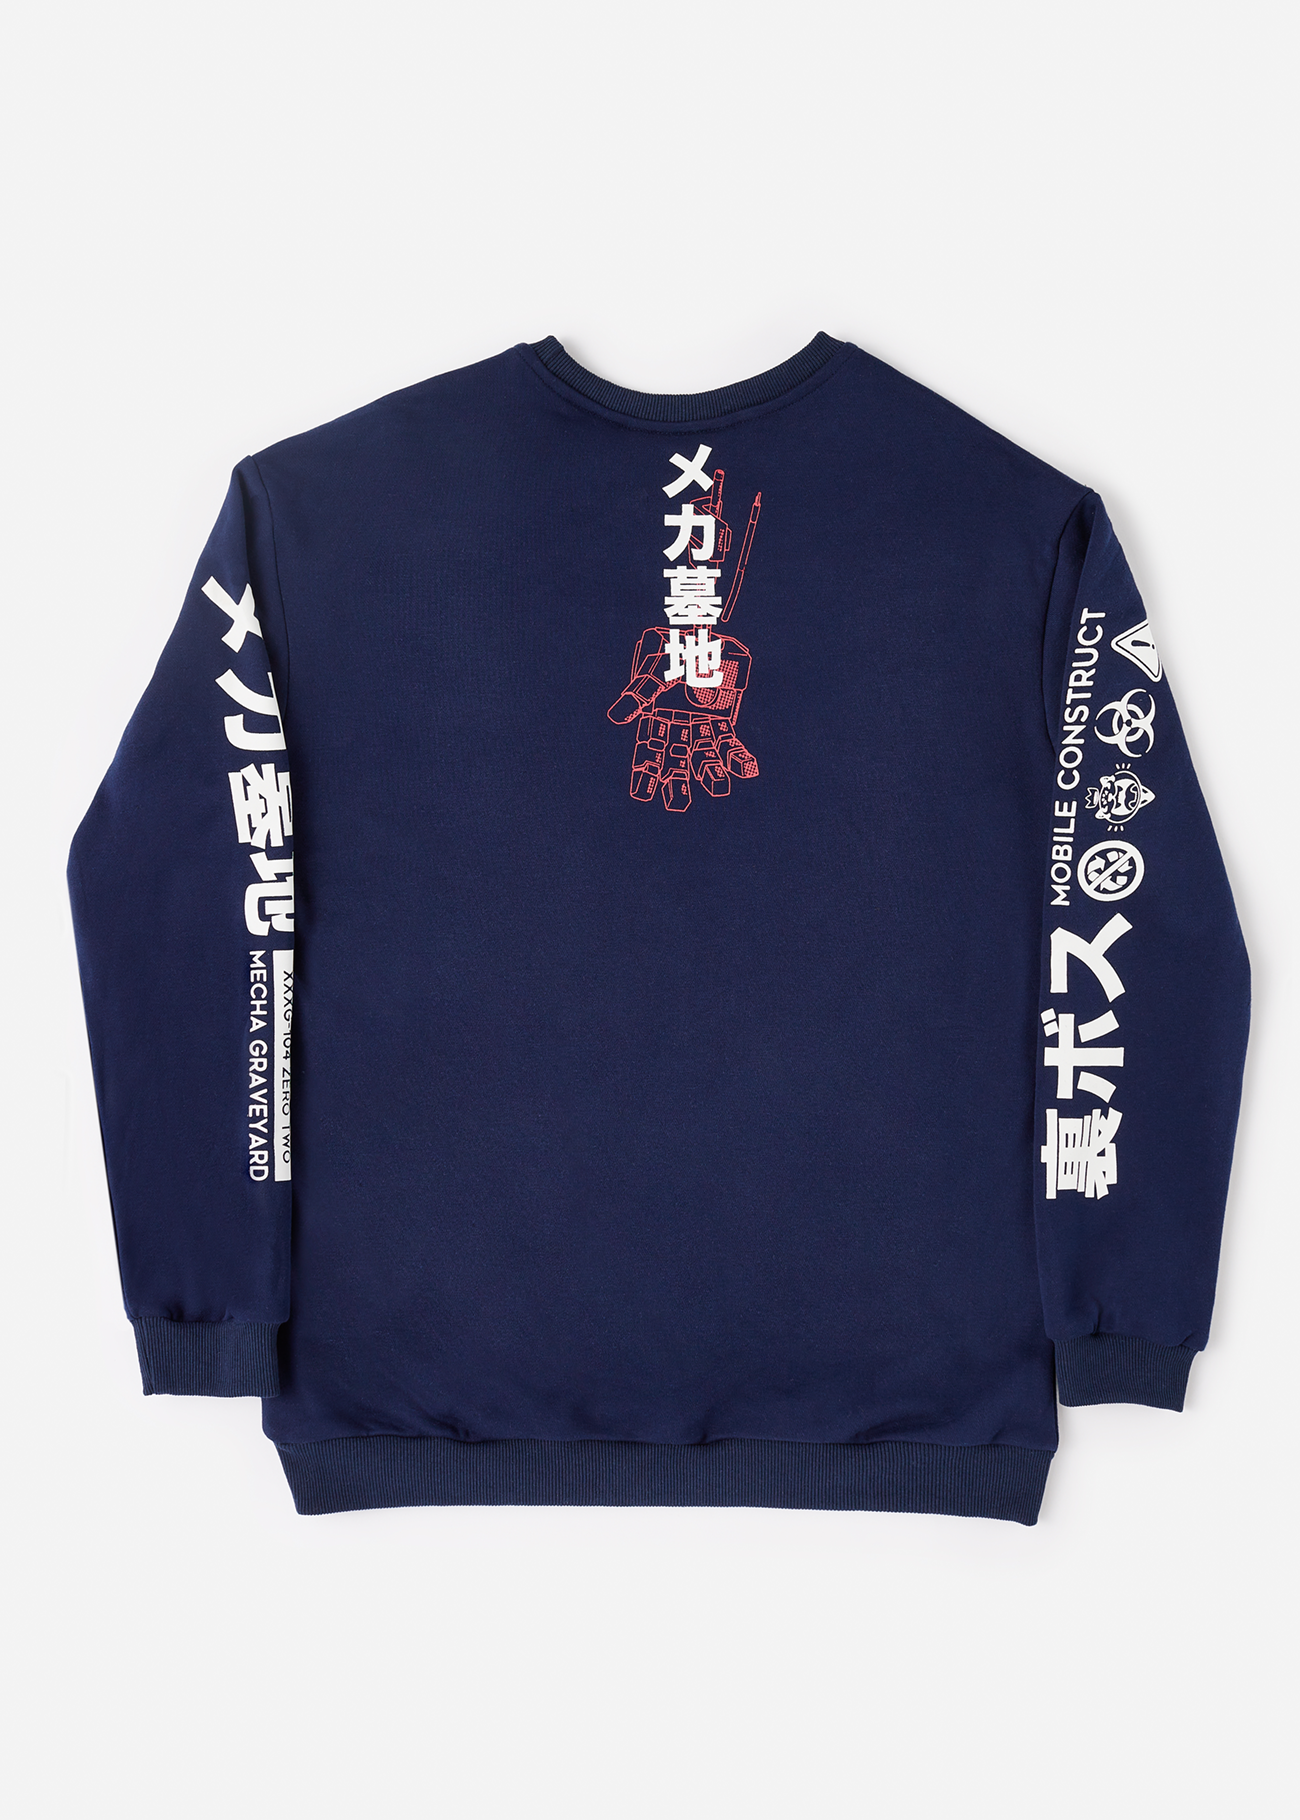 Back photo of Anime-inspired blue sweater featuring a screen-printed mecha design on the front, styled for anime enthusiasts.